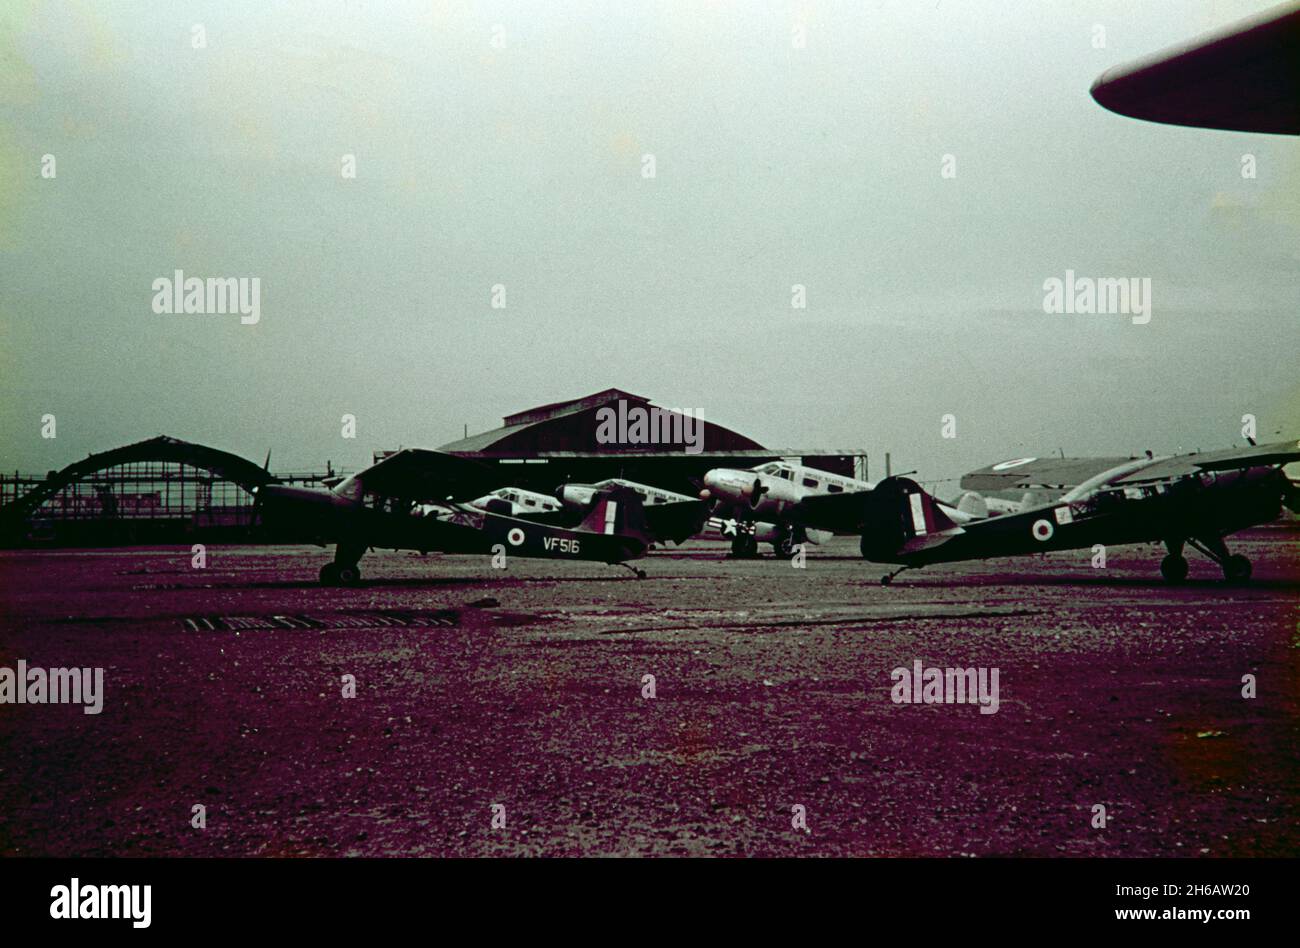 Vintage photograph taken in 1953 or 1954 in Seoul, South Korea, during the Korean War. The ramp area of the airport showing British Royal Air Force, RAF, Auster AOP.6, serial number VF516 amongst other aircraft. Stock Photo